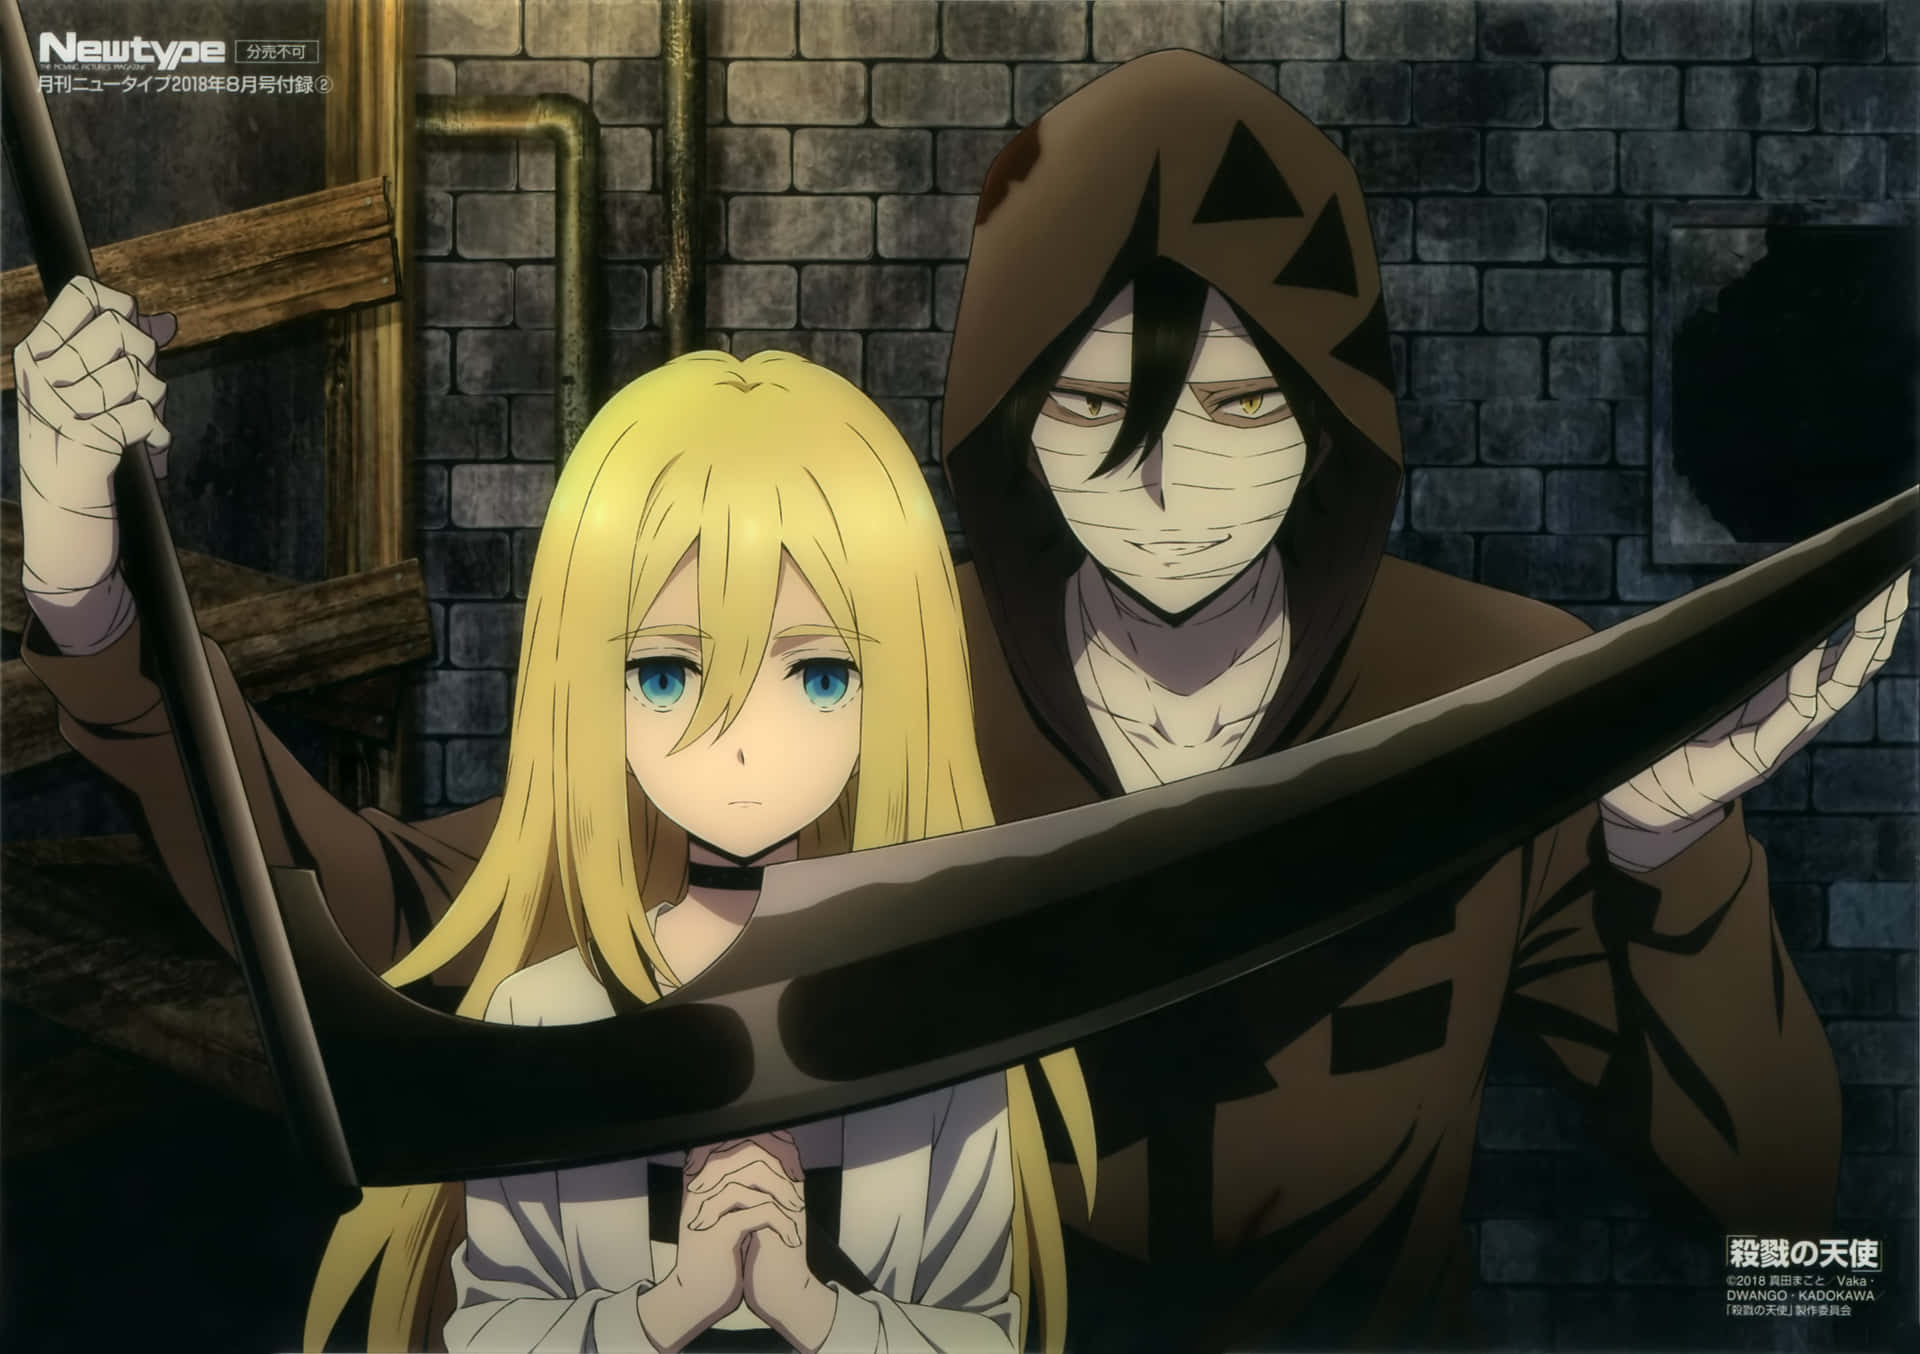 A mysterious, captivating scene from the supernatural thriller anime Angels Of Death.